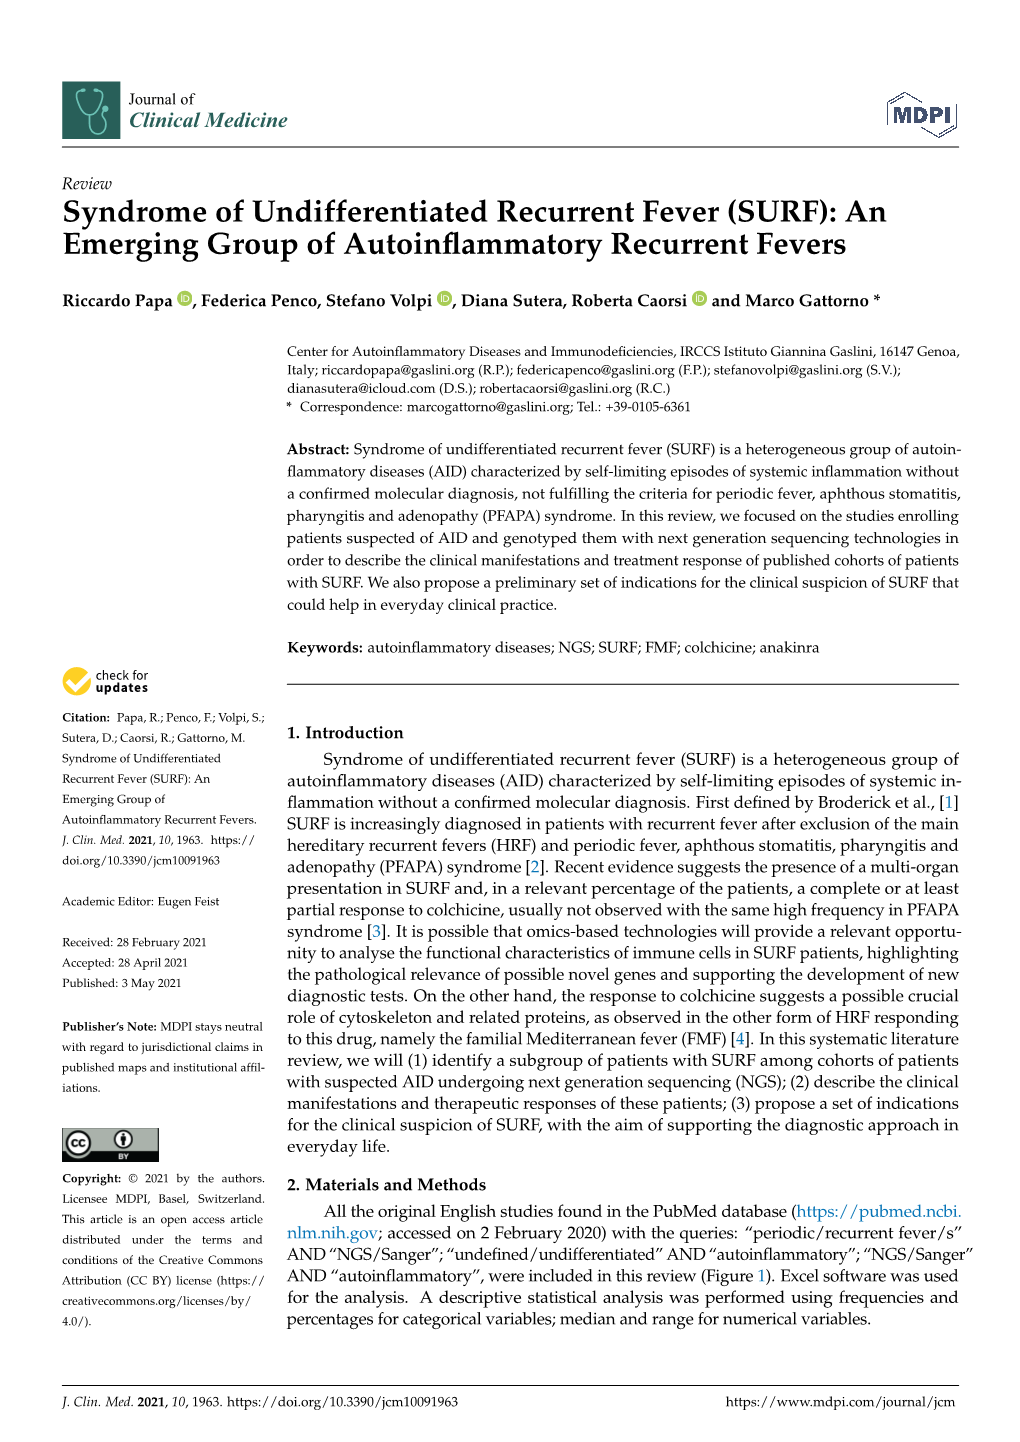 SURF): an Emerging Group of Autoinﬂammatory Recurrent Fevers